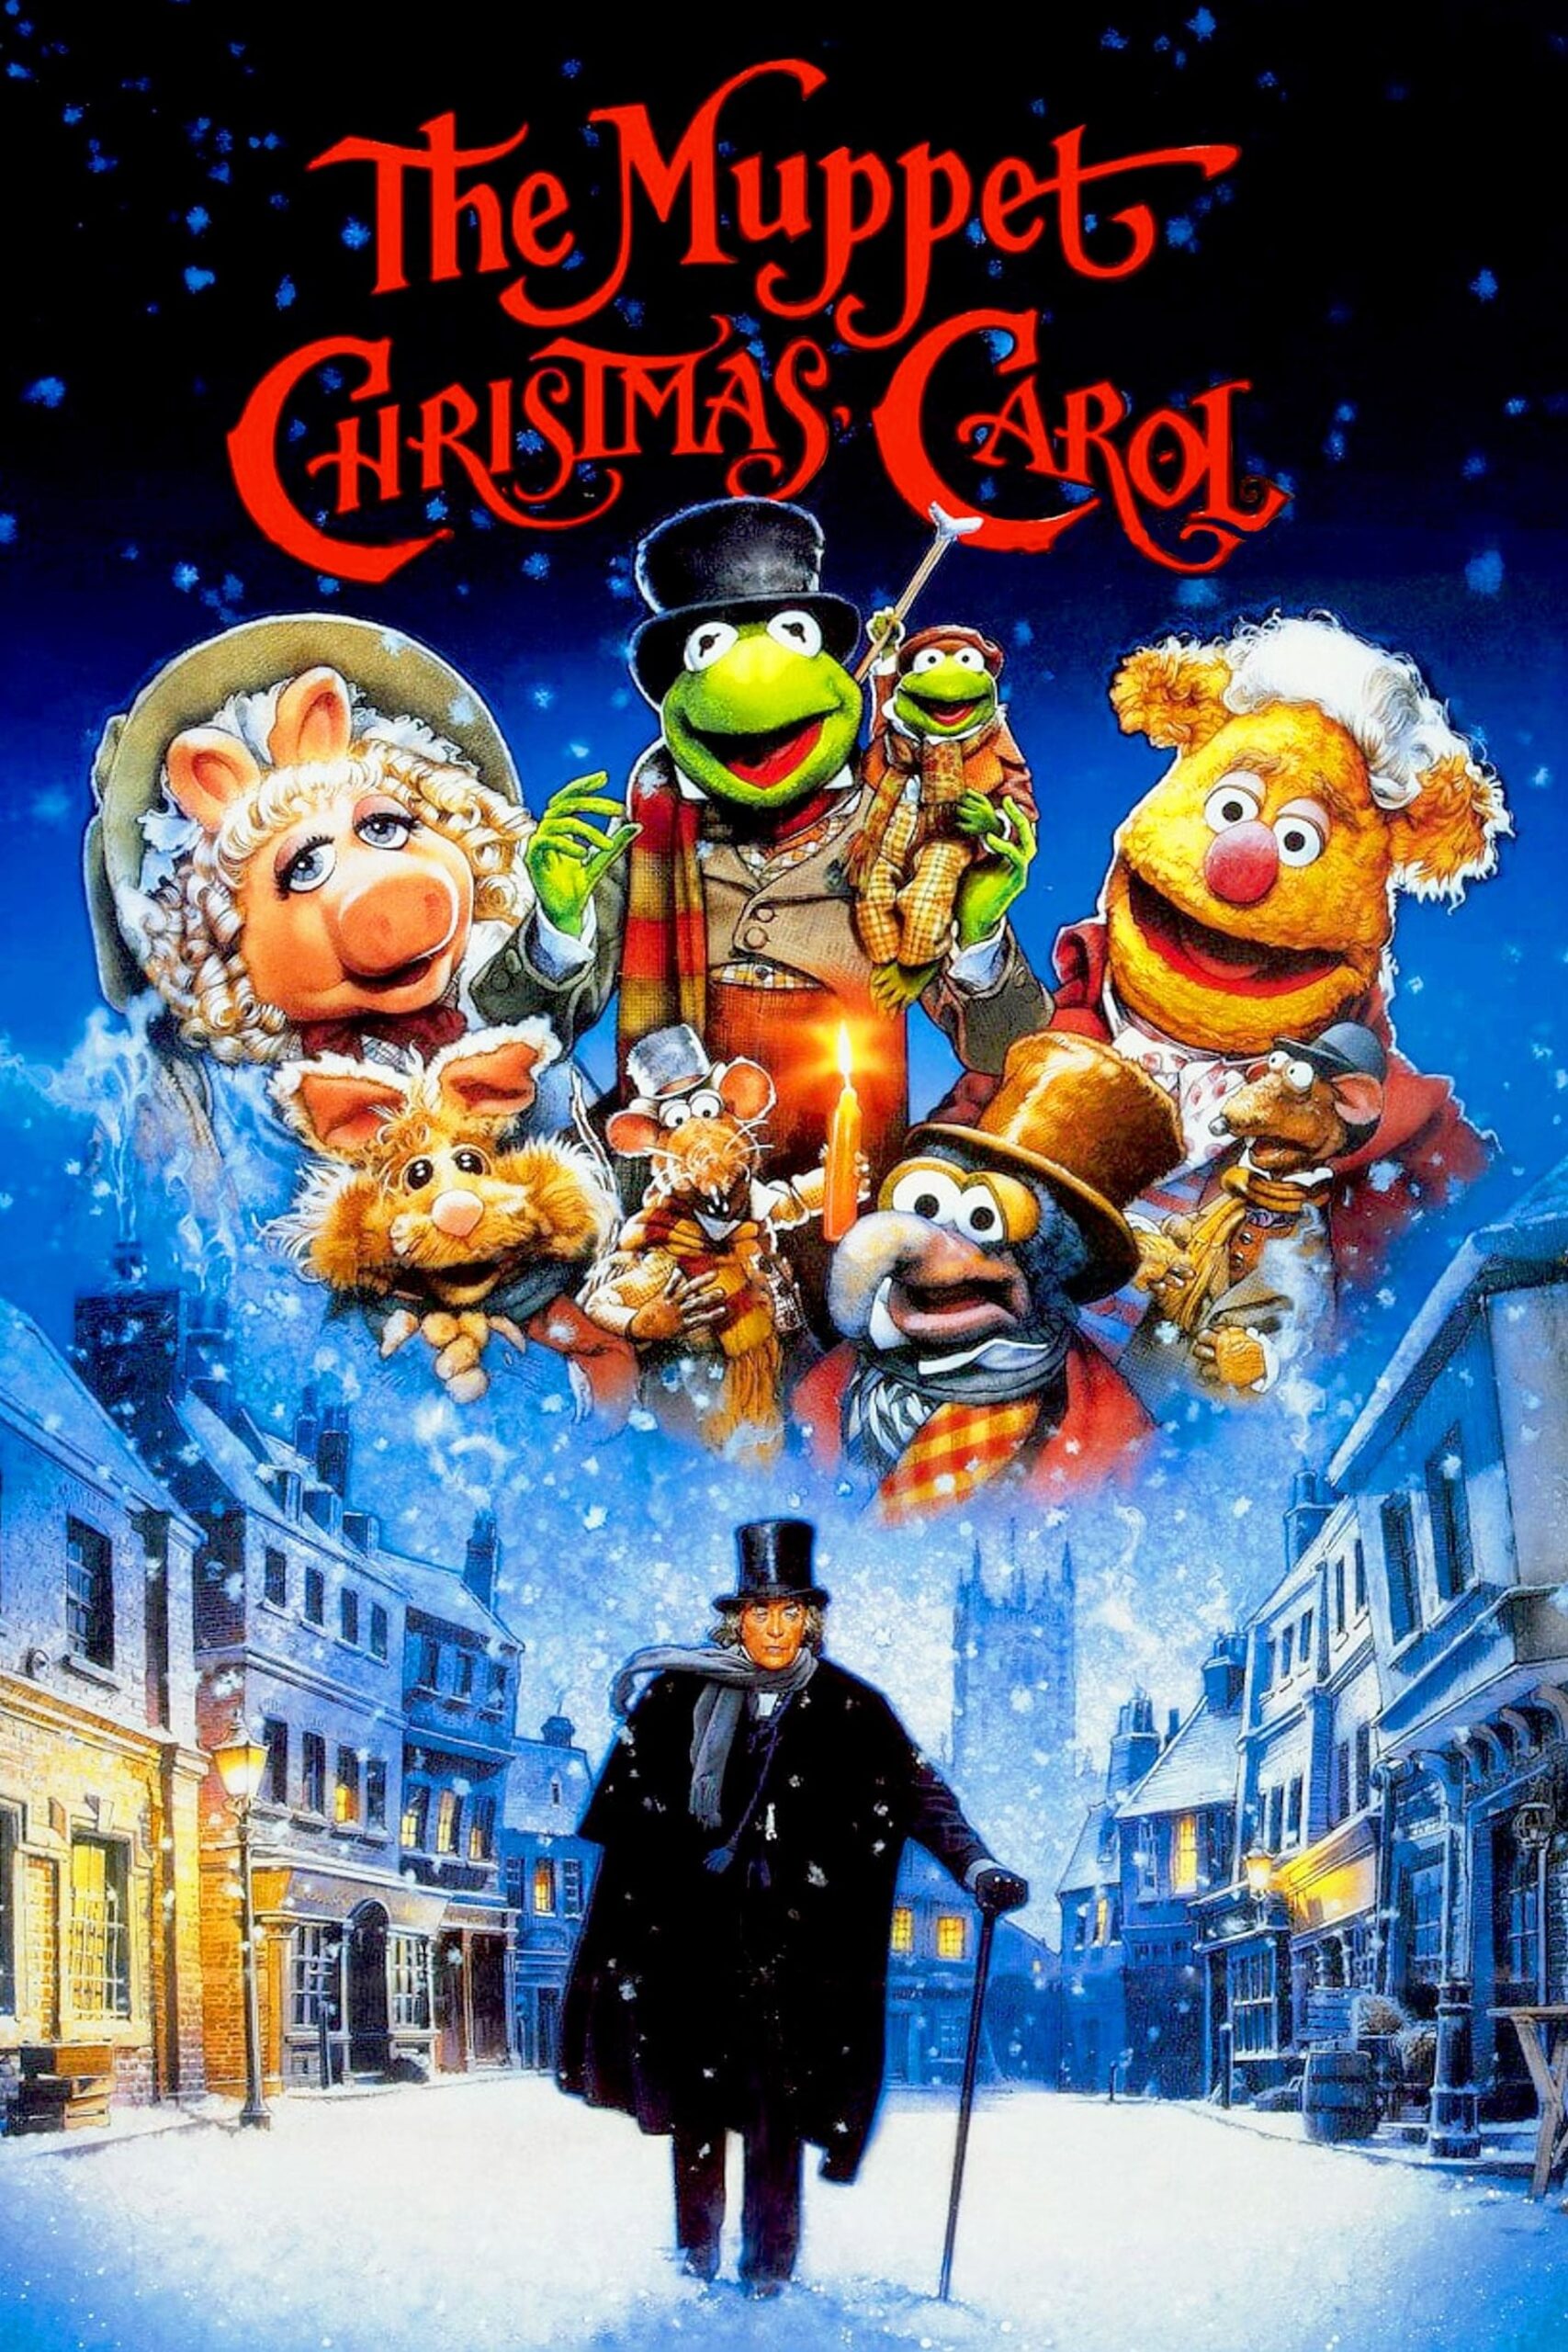 Poster for the movie "The Muppet Christmas Carol"